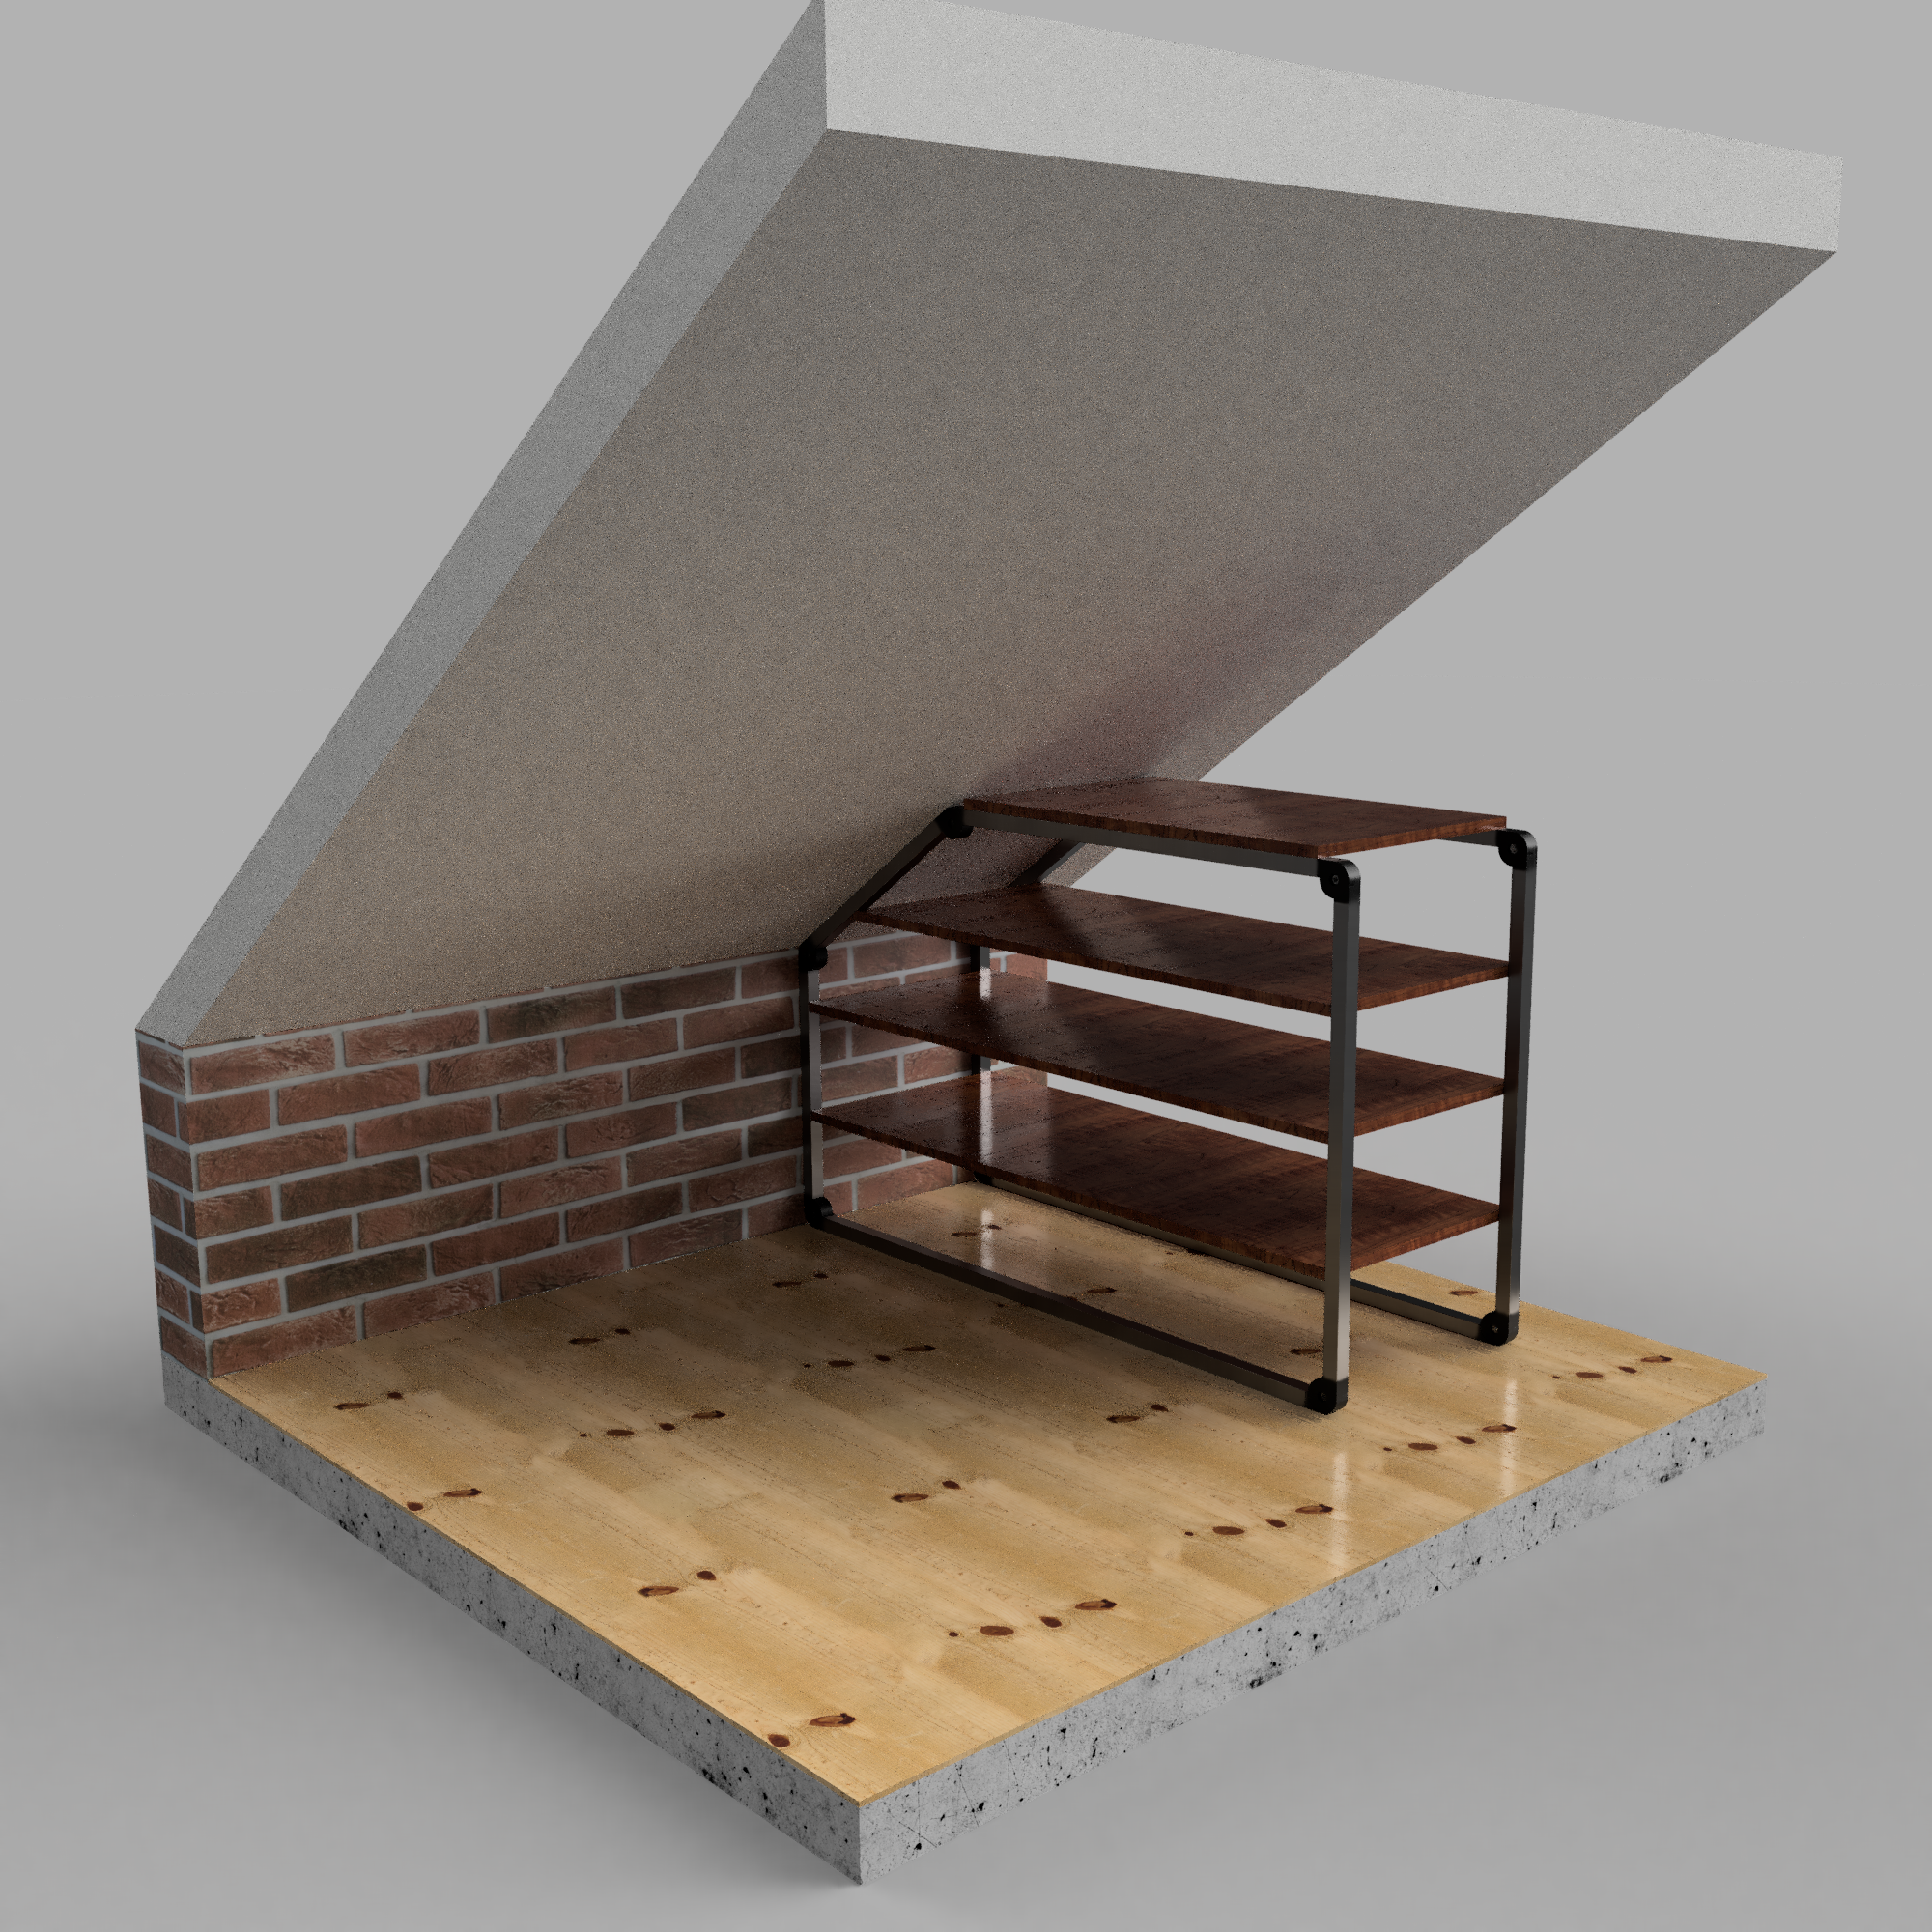 Example illustration of an attic cupboard